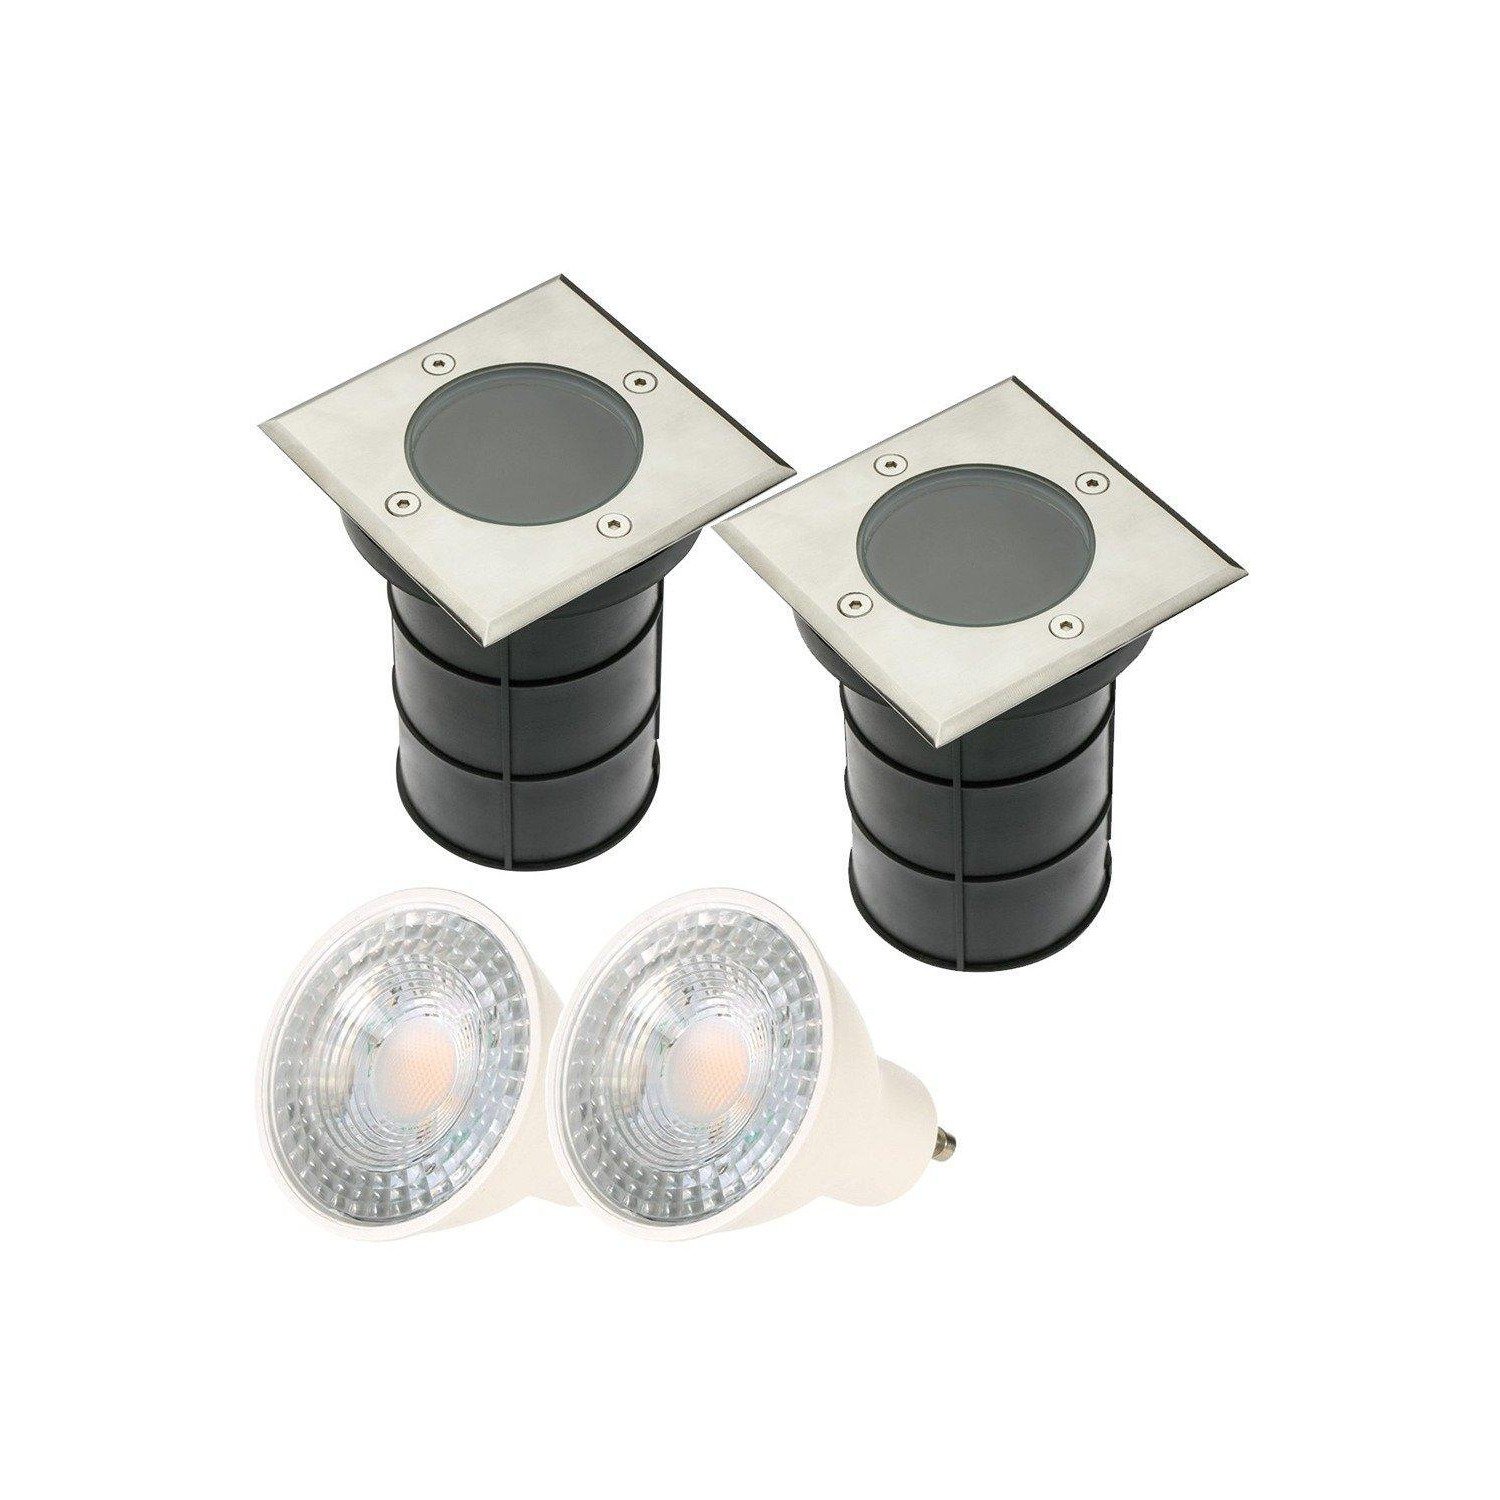 'Bridget' Two Square Large With Bulbs Stainless Steel Inground Or Decking Lights - image 1